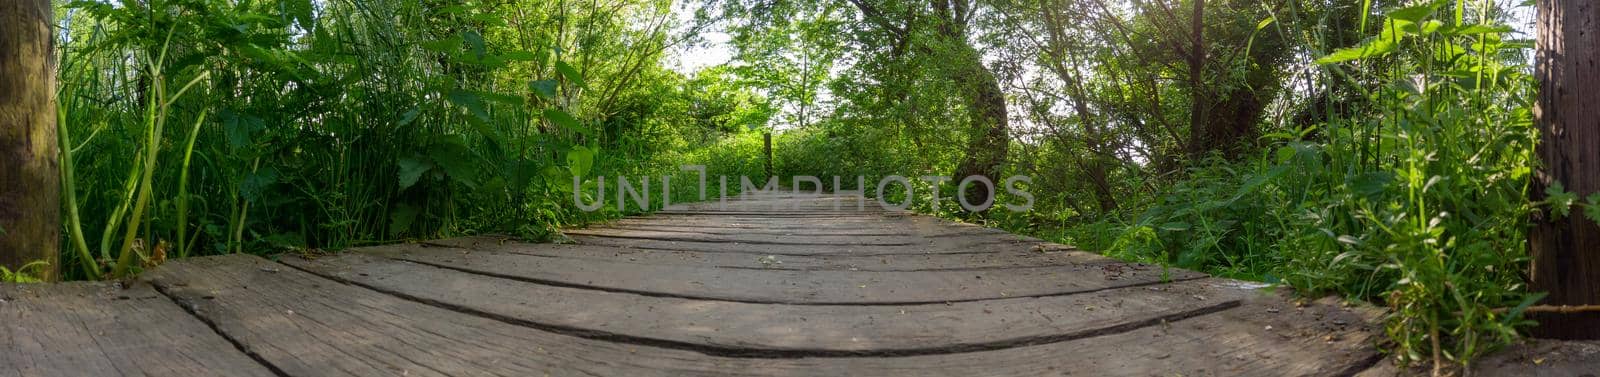 Lowangle panoramic view on a wooden footpaht in a natural reserve like the Blankaart in Diksmuide